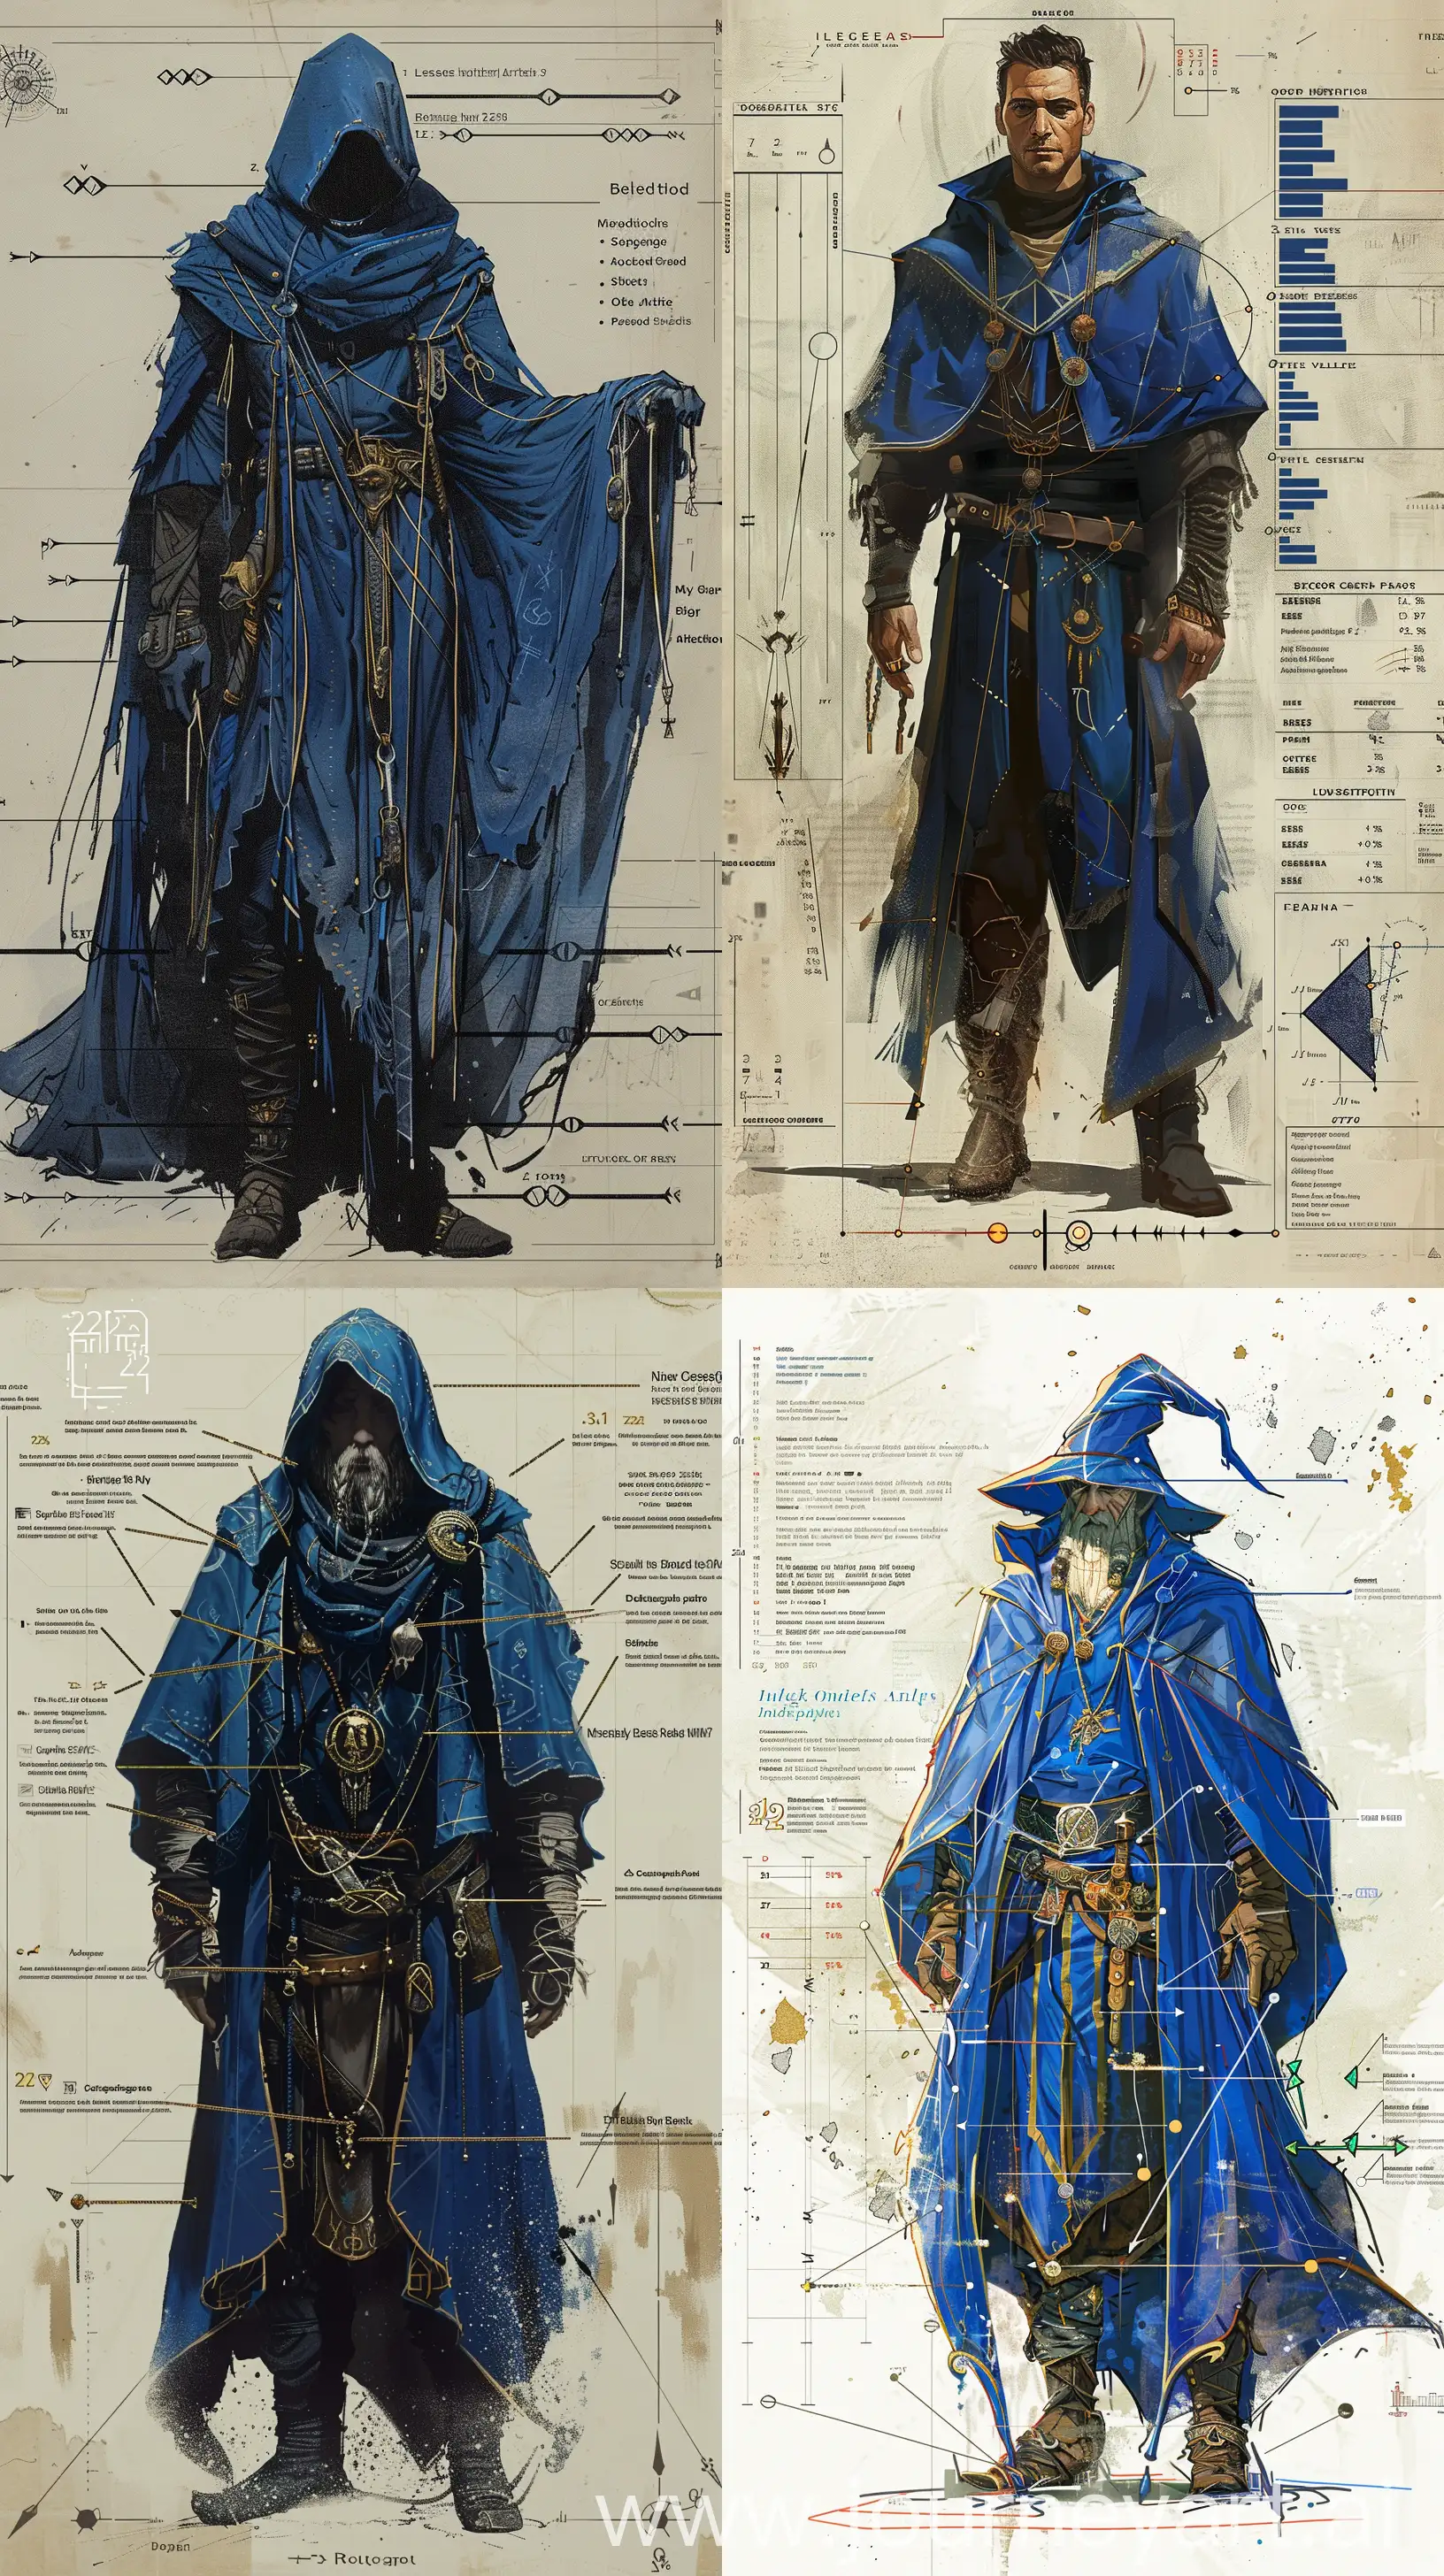 wizard, cheesemancy, blue robe, 22 years old Prompt: magazine, statistics, lines pointing to clothing and gear, detailed character from a dark, high epic fantasy, lots of details, graphs --ar 9:16